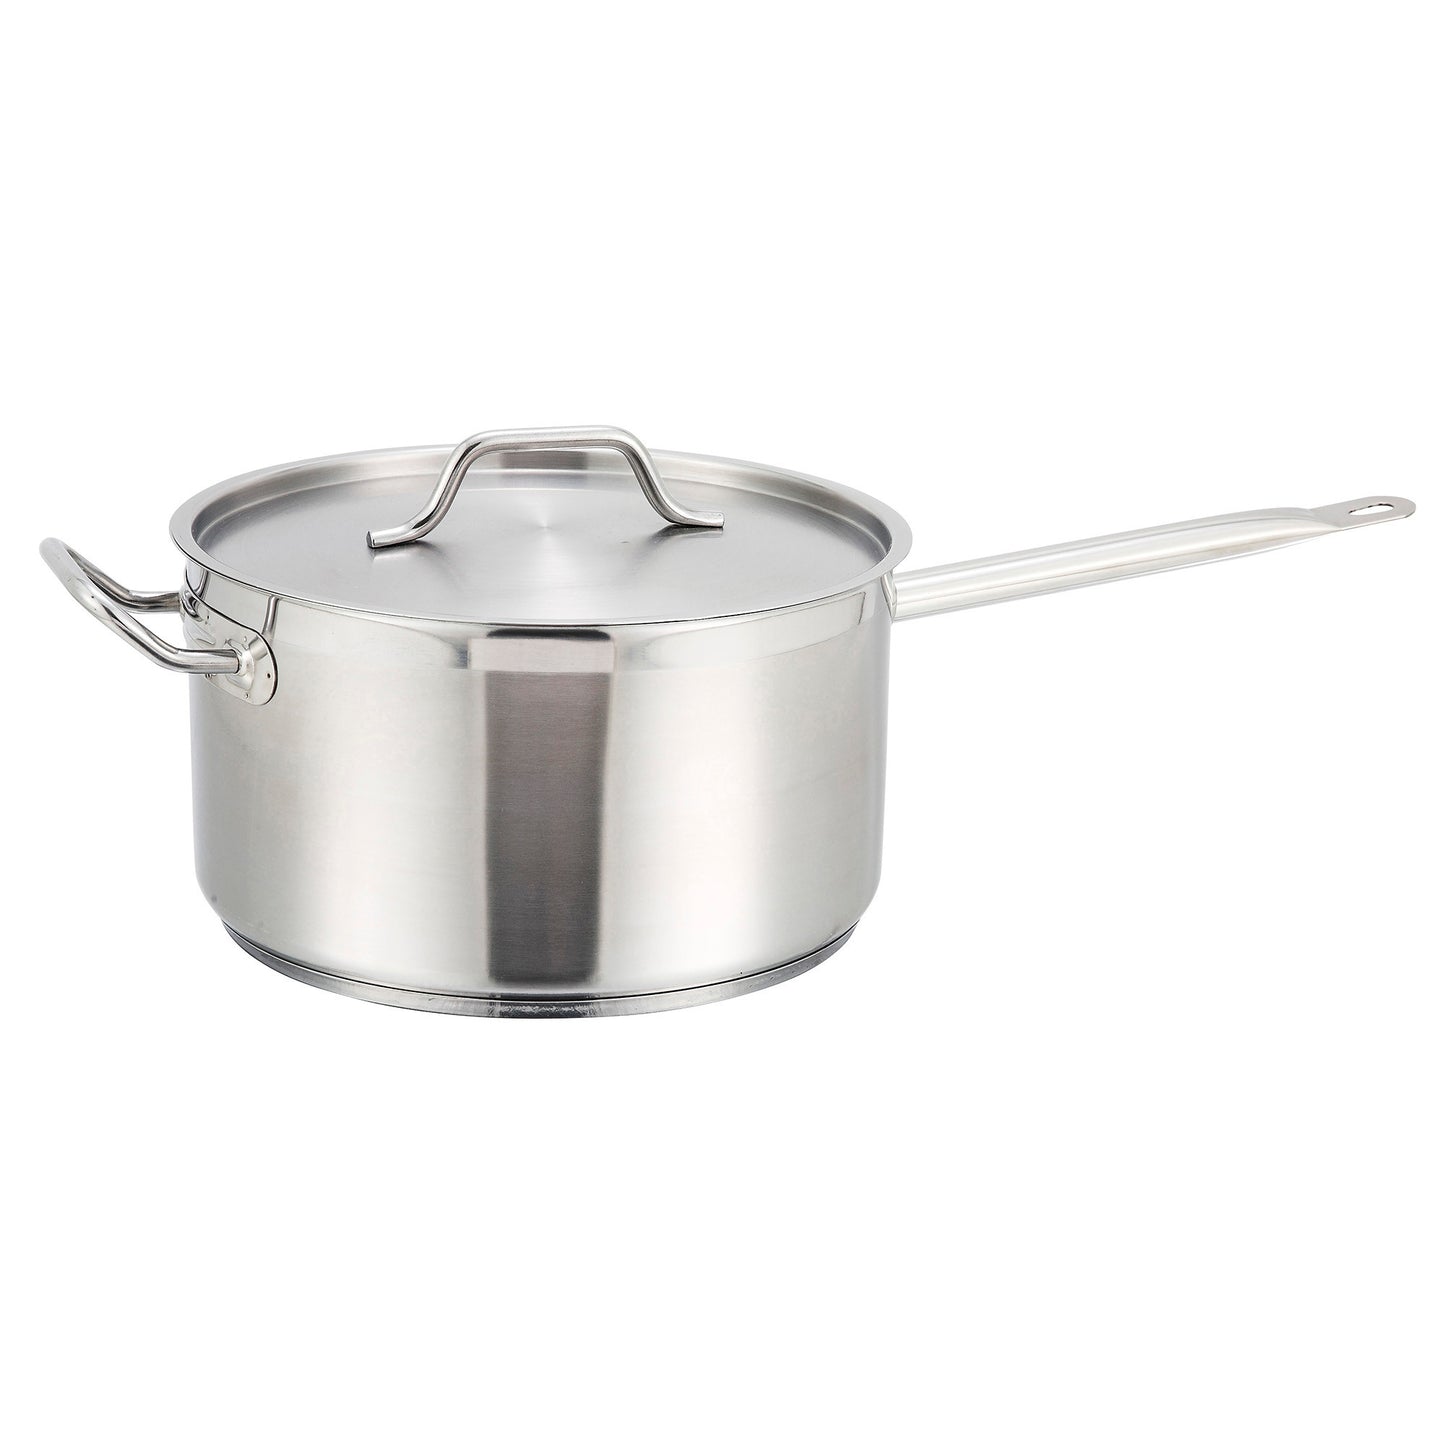 Stainless Steel Sauce Pan with Cover - 10 Quart